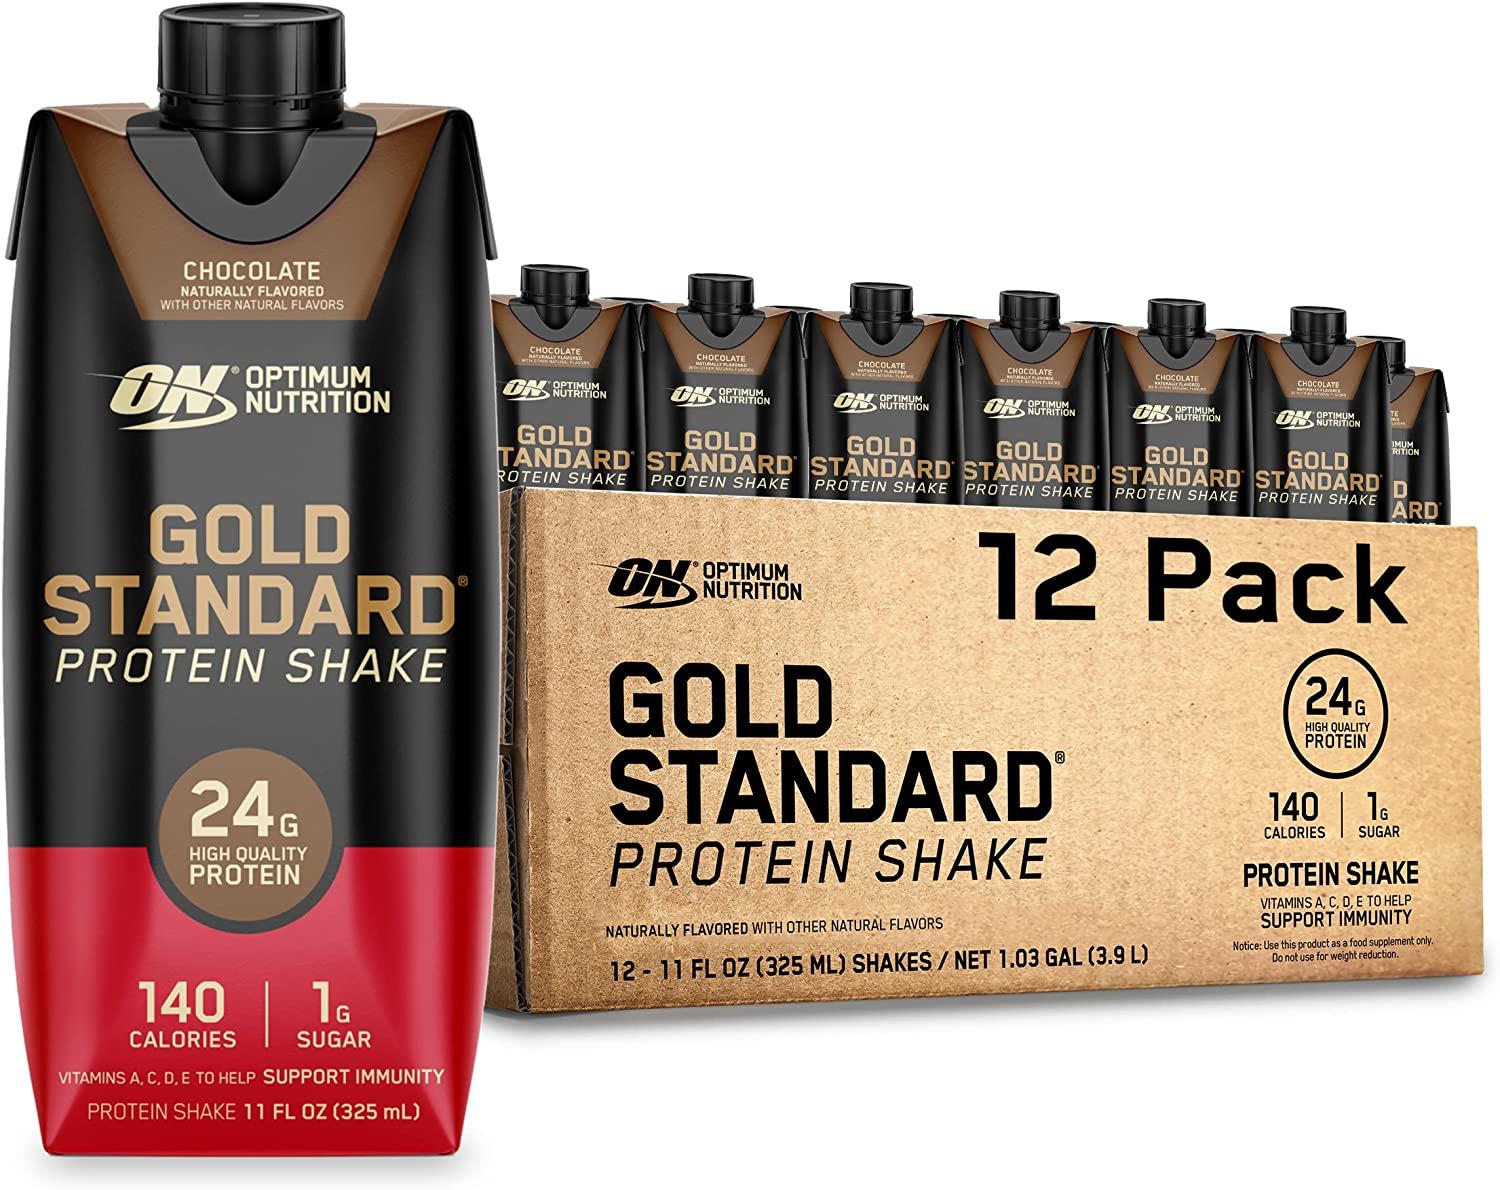 Optimum Nutrition Gold Standard Protein Shake 12 Count for $17.48 Shipped